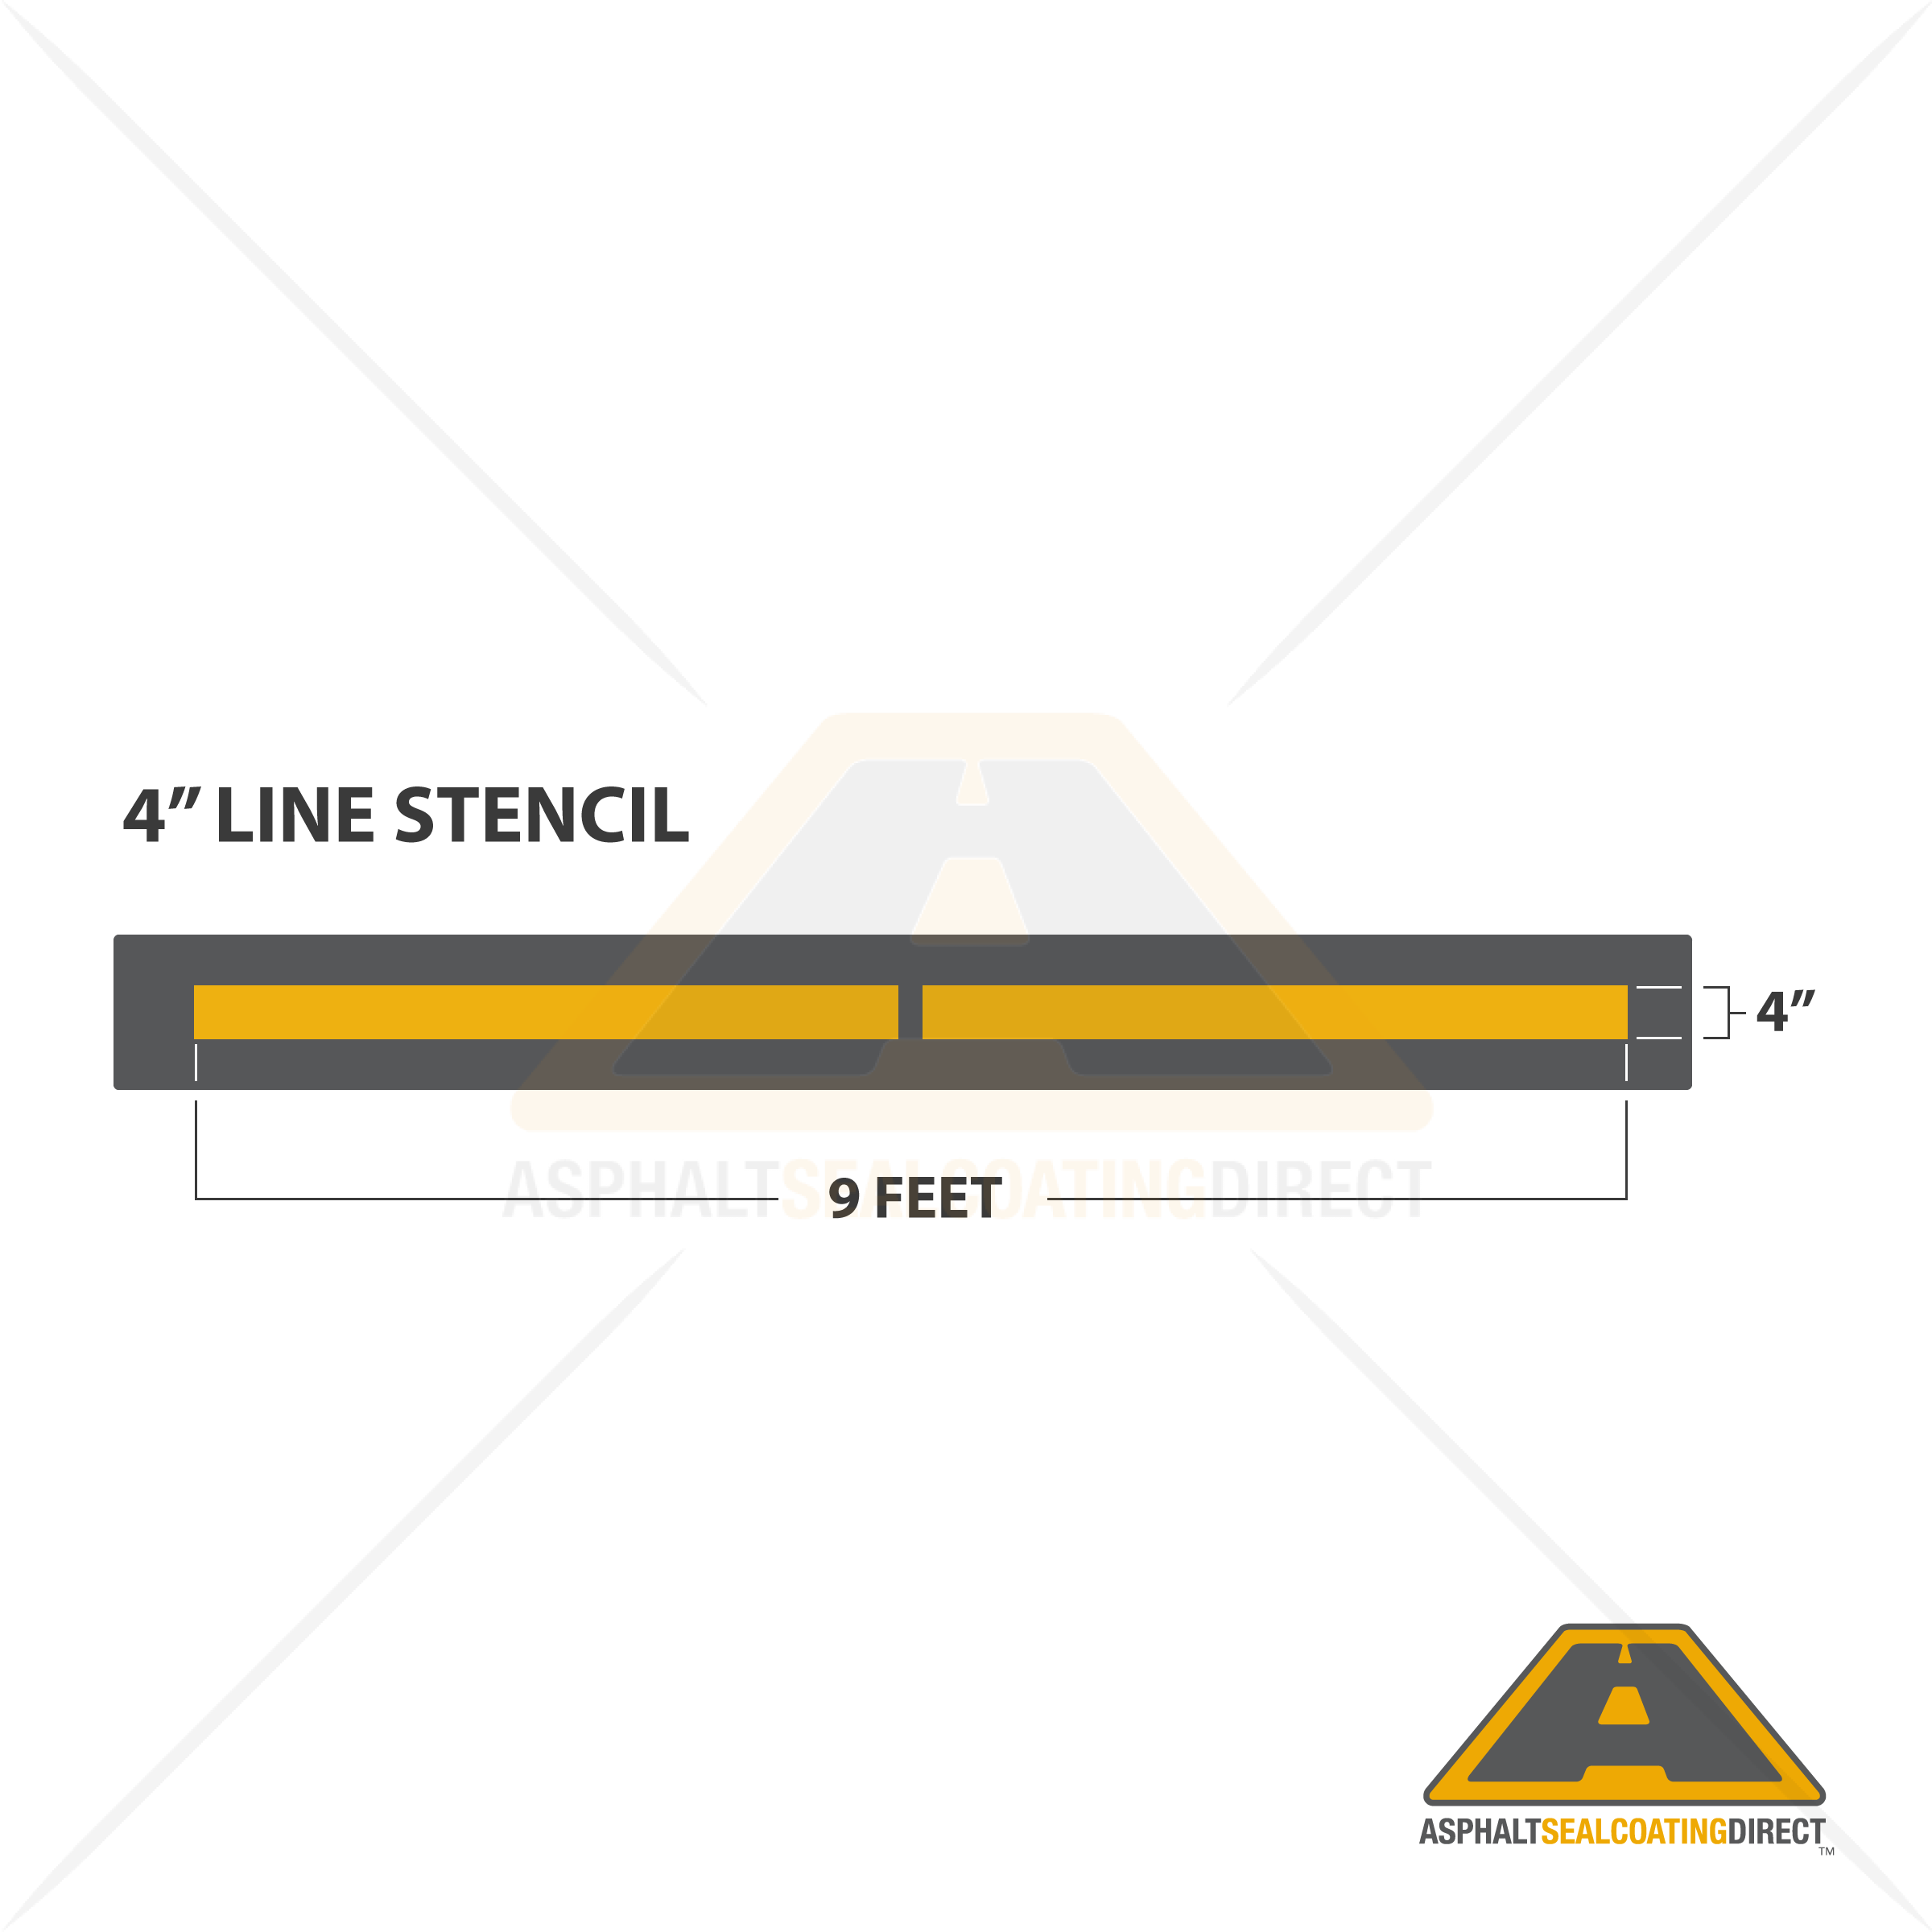 View The Full Image Image Of Parking Lot Stall Line Stencil - Parking Lot Lines, Transparent background PNG HD thumbnail